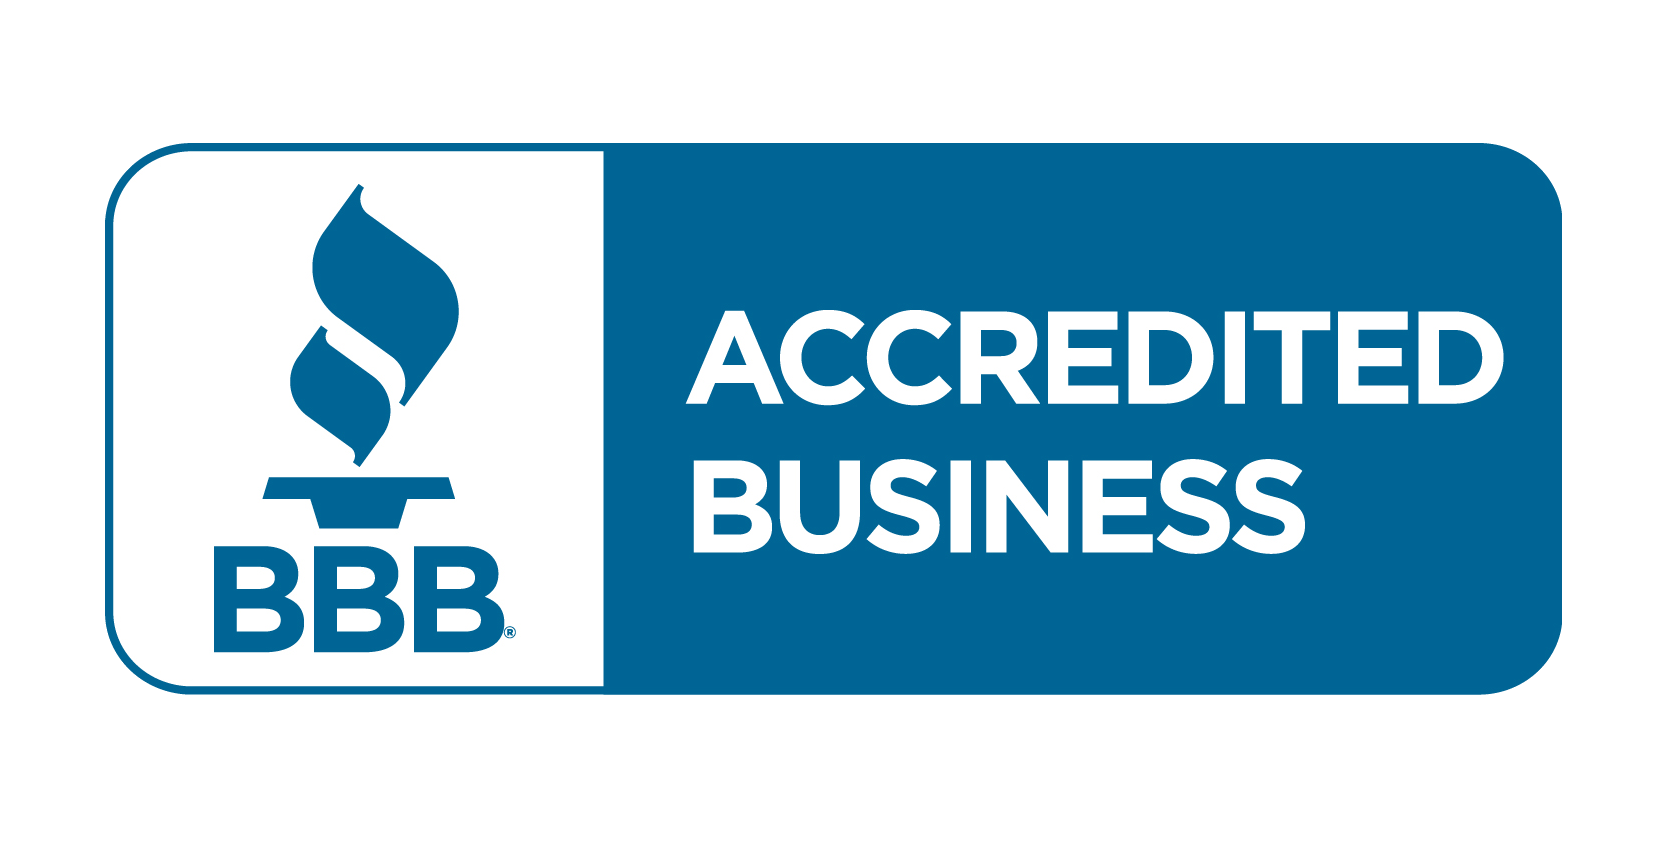 BBB Logo for Accredited Business